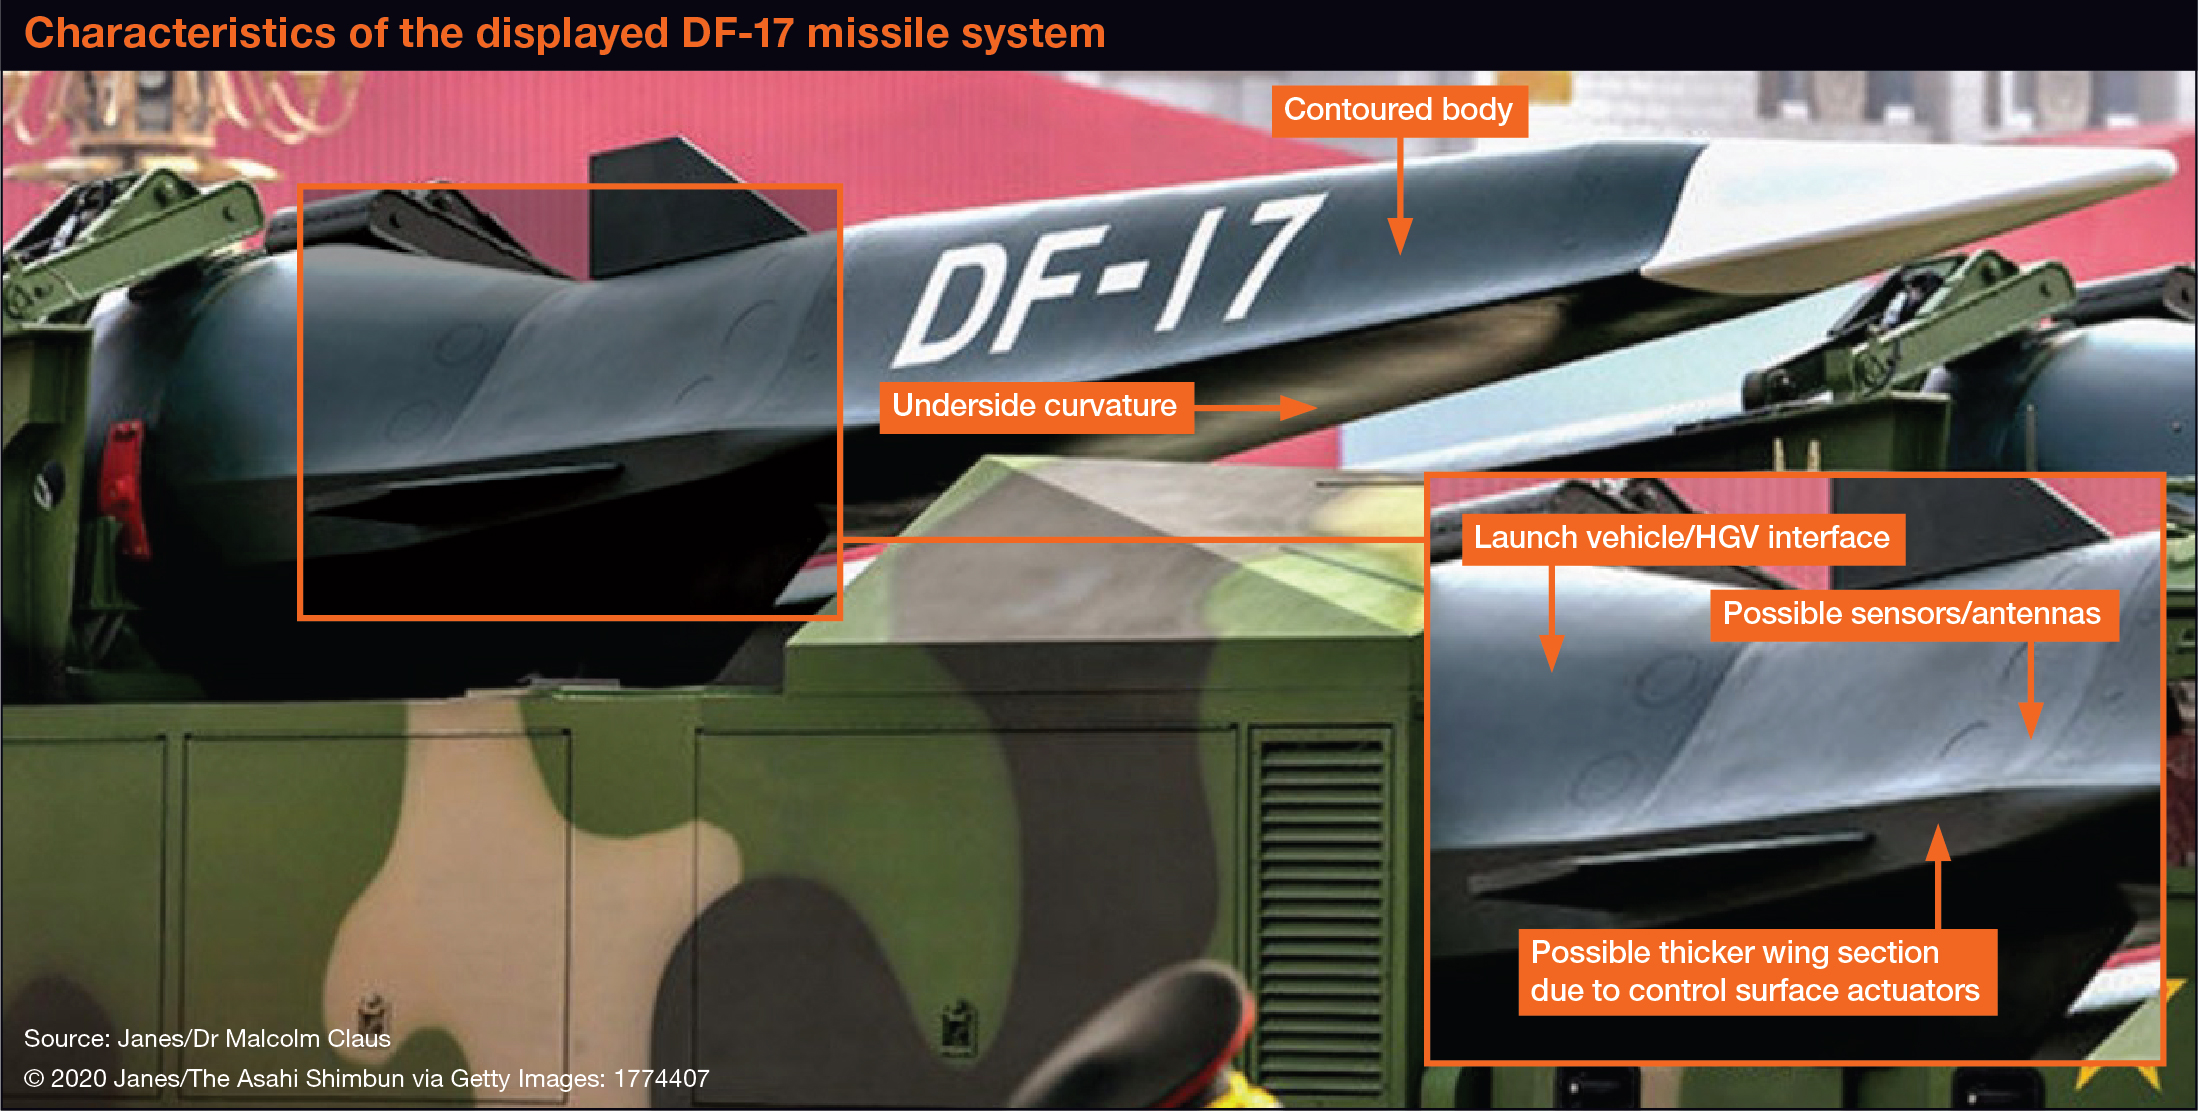 Characteristics of the displayed DF-17 missile system (© 2020 Janes/The Asahi Shimbun via Getty Images)